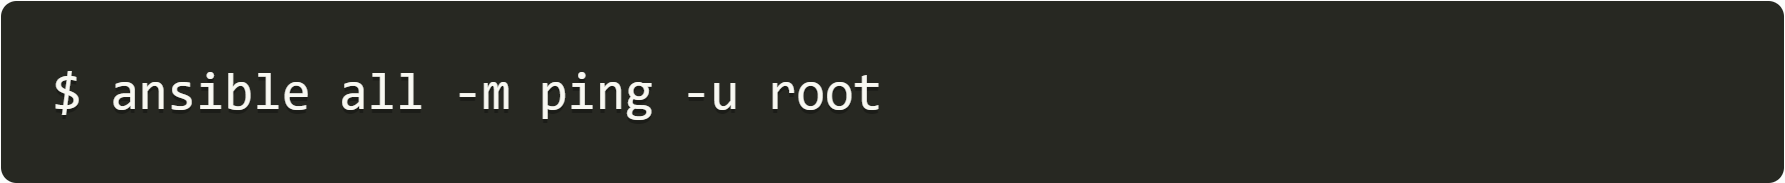 ansible all root